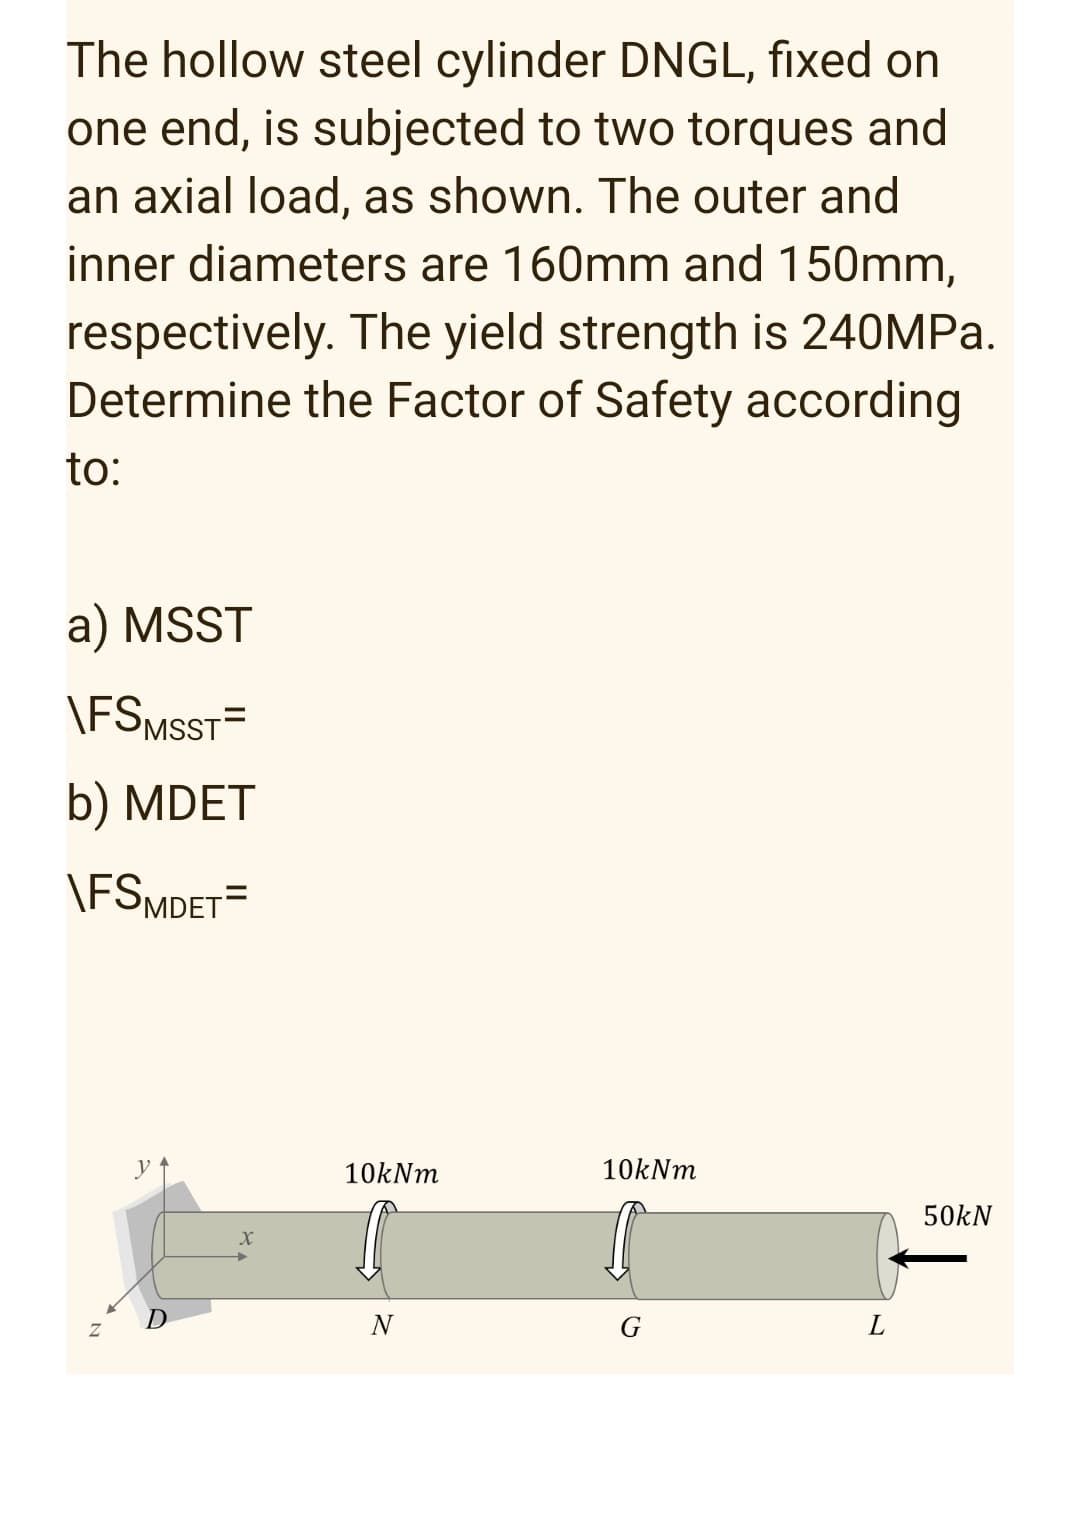 The hollow steel cylinder DNGL, fixed on
one end, is subjected to two torques and
an axial load, as shown. The outer and
inner diameters are 160mm and 150mm,
respectively. The yield strength is 240MPa.
Determine the Factor of Safety according
to:
a) MSST
\FSMSST=
b) MDET
\FSMDET=
10kNm
50kN
G
X
10kNm
N
L